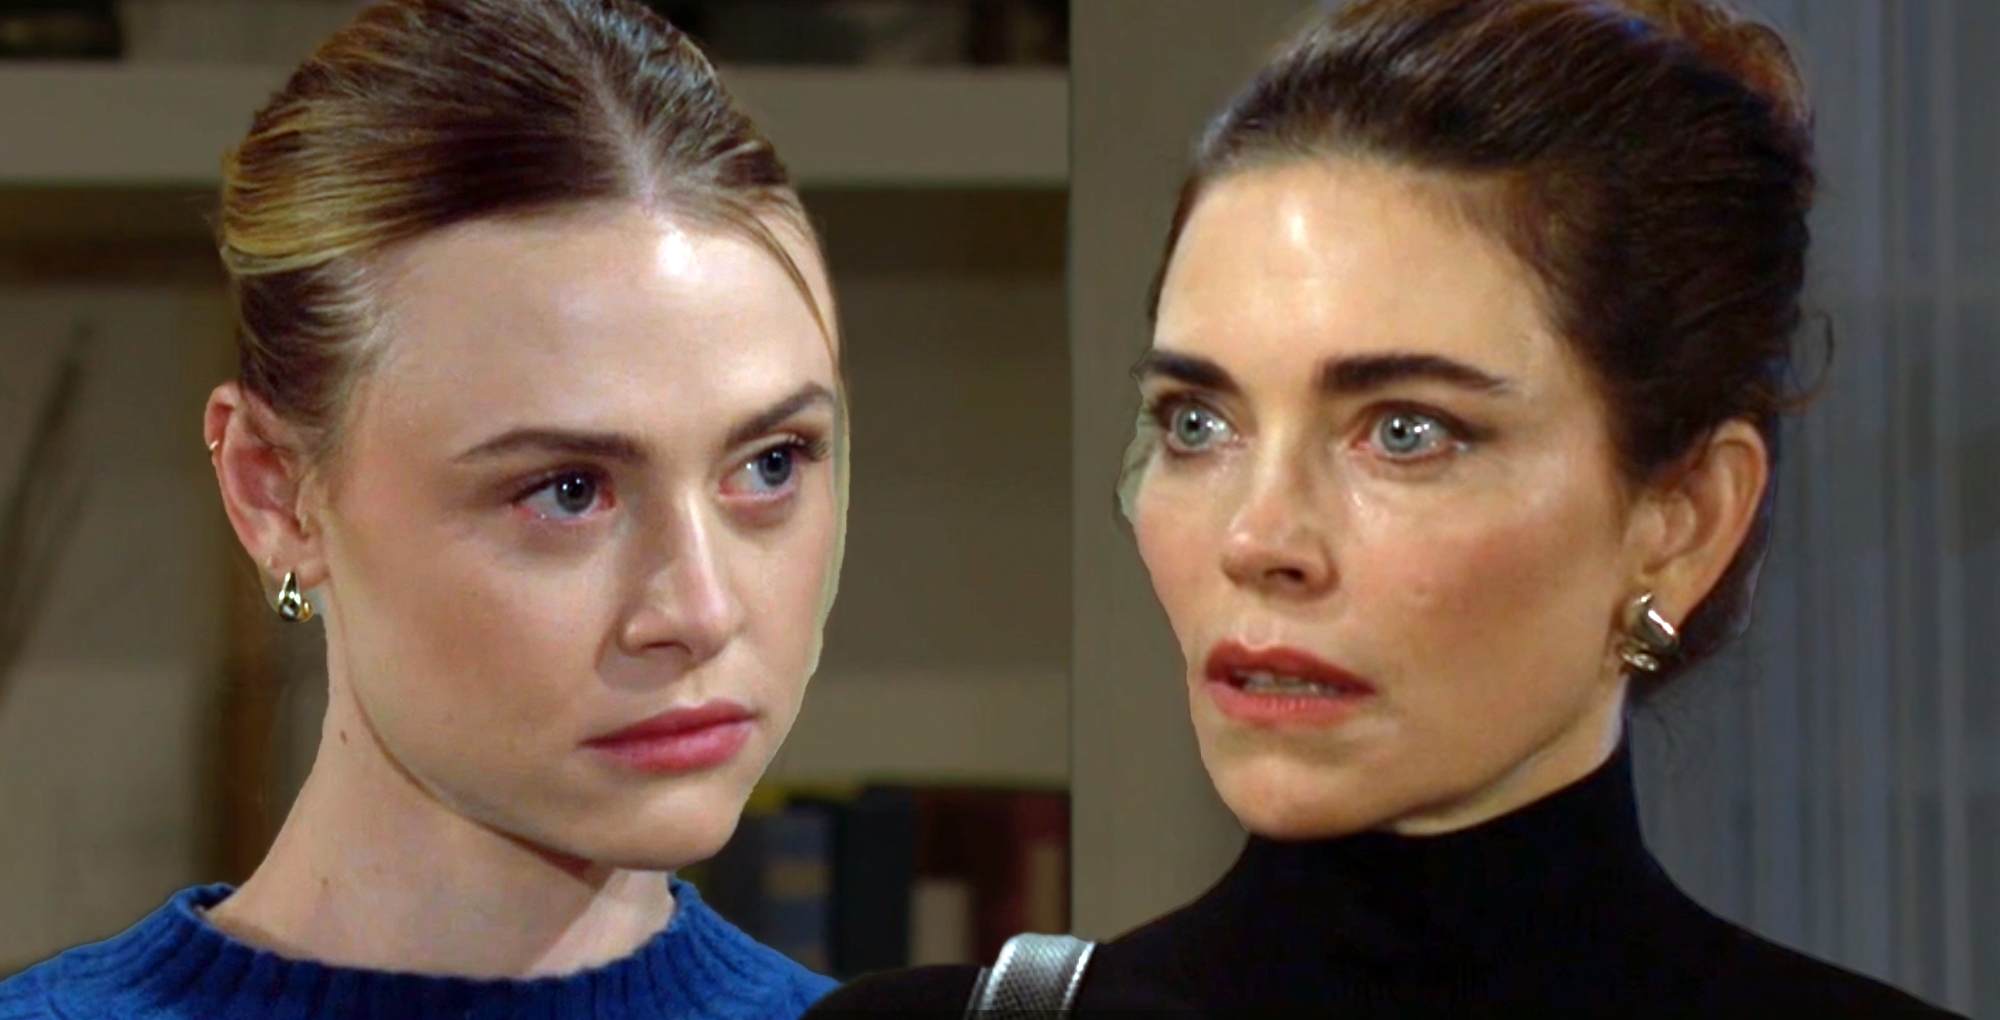 claire grace and victoria newman on the young and the restless.